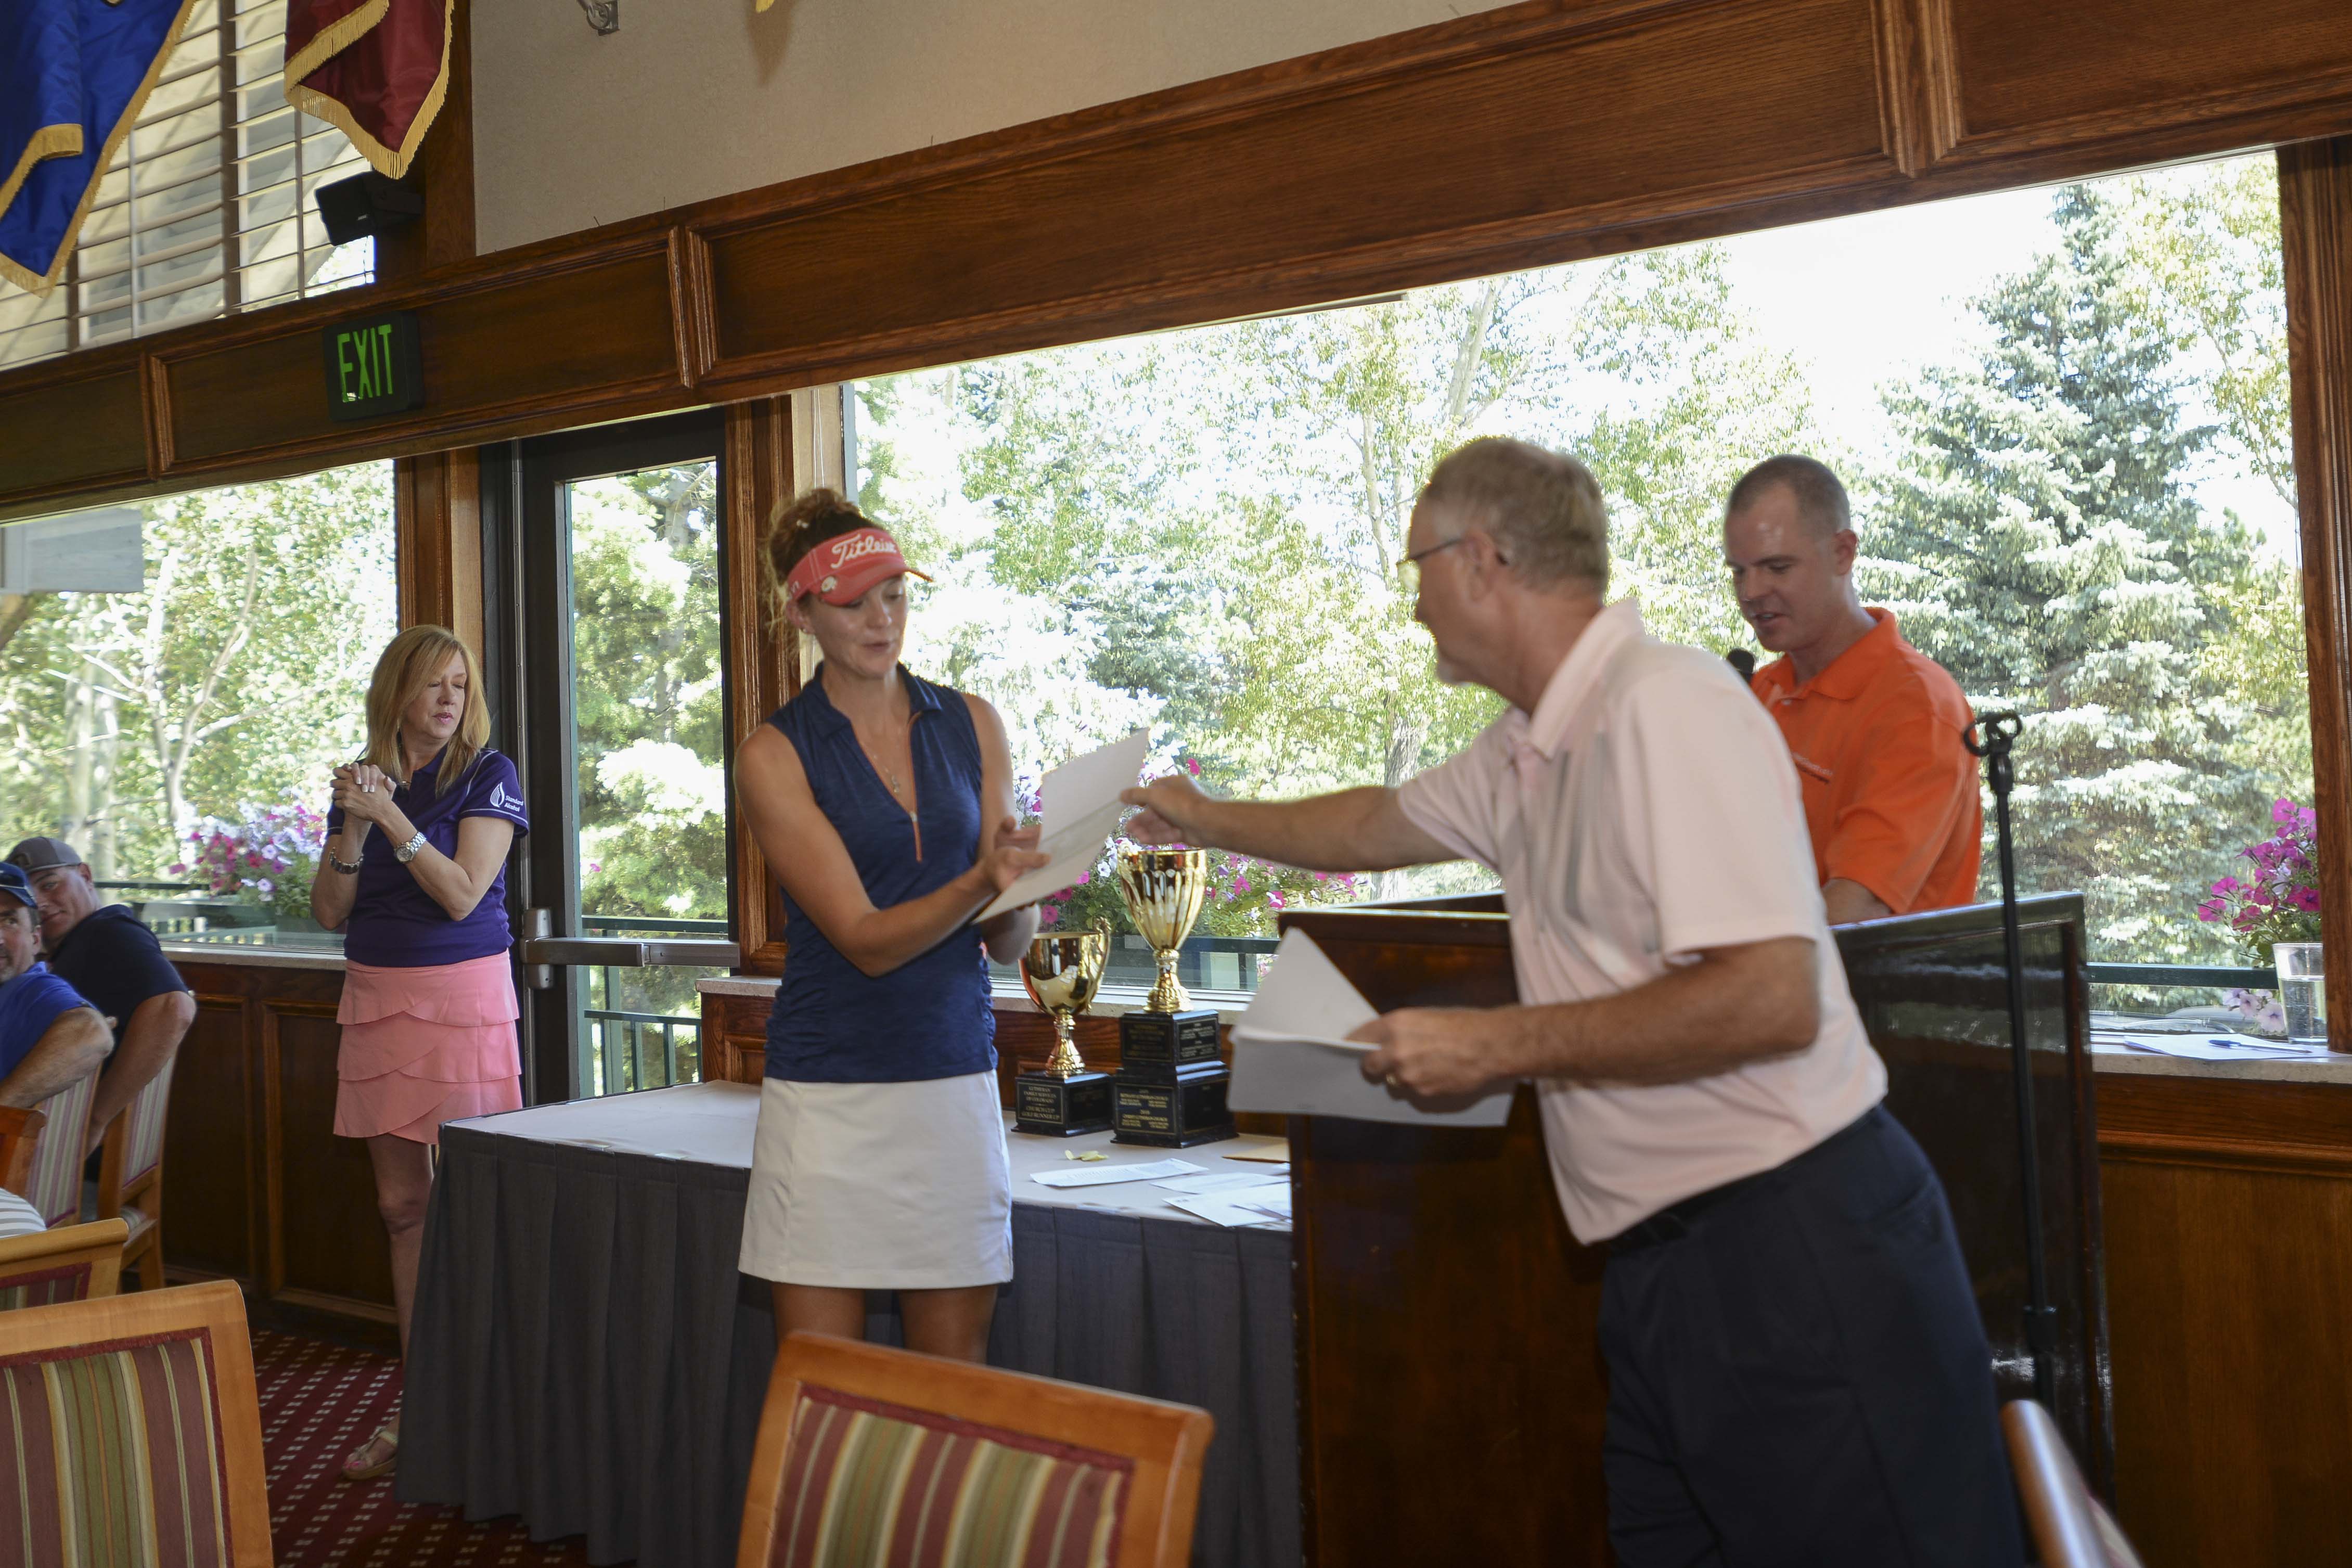 Nicole Barclay receives the award for the Women #39 s Longest Drive contest